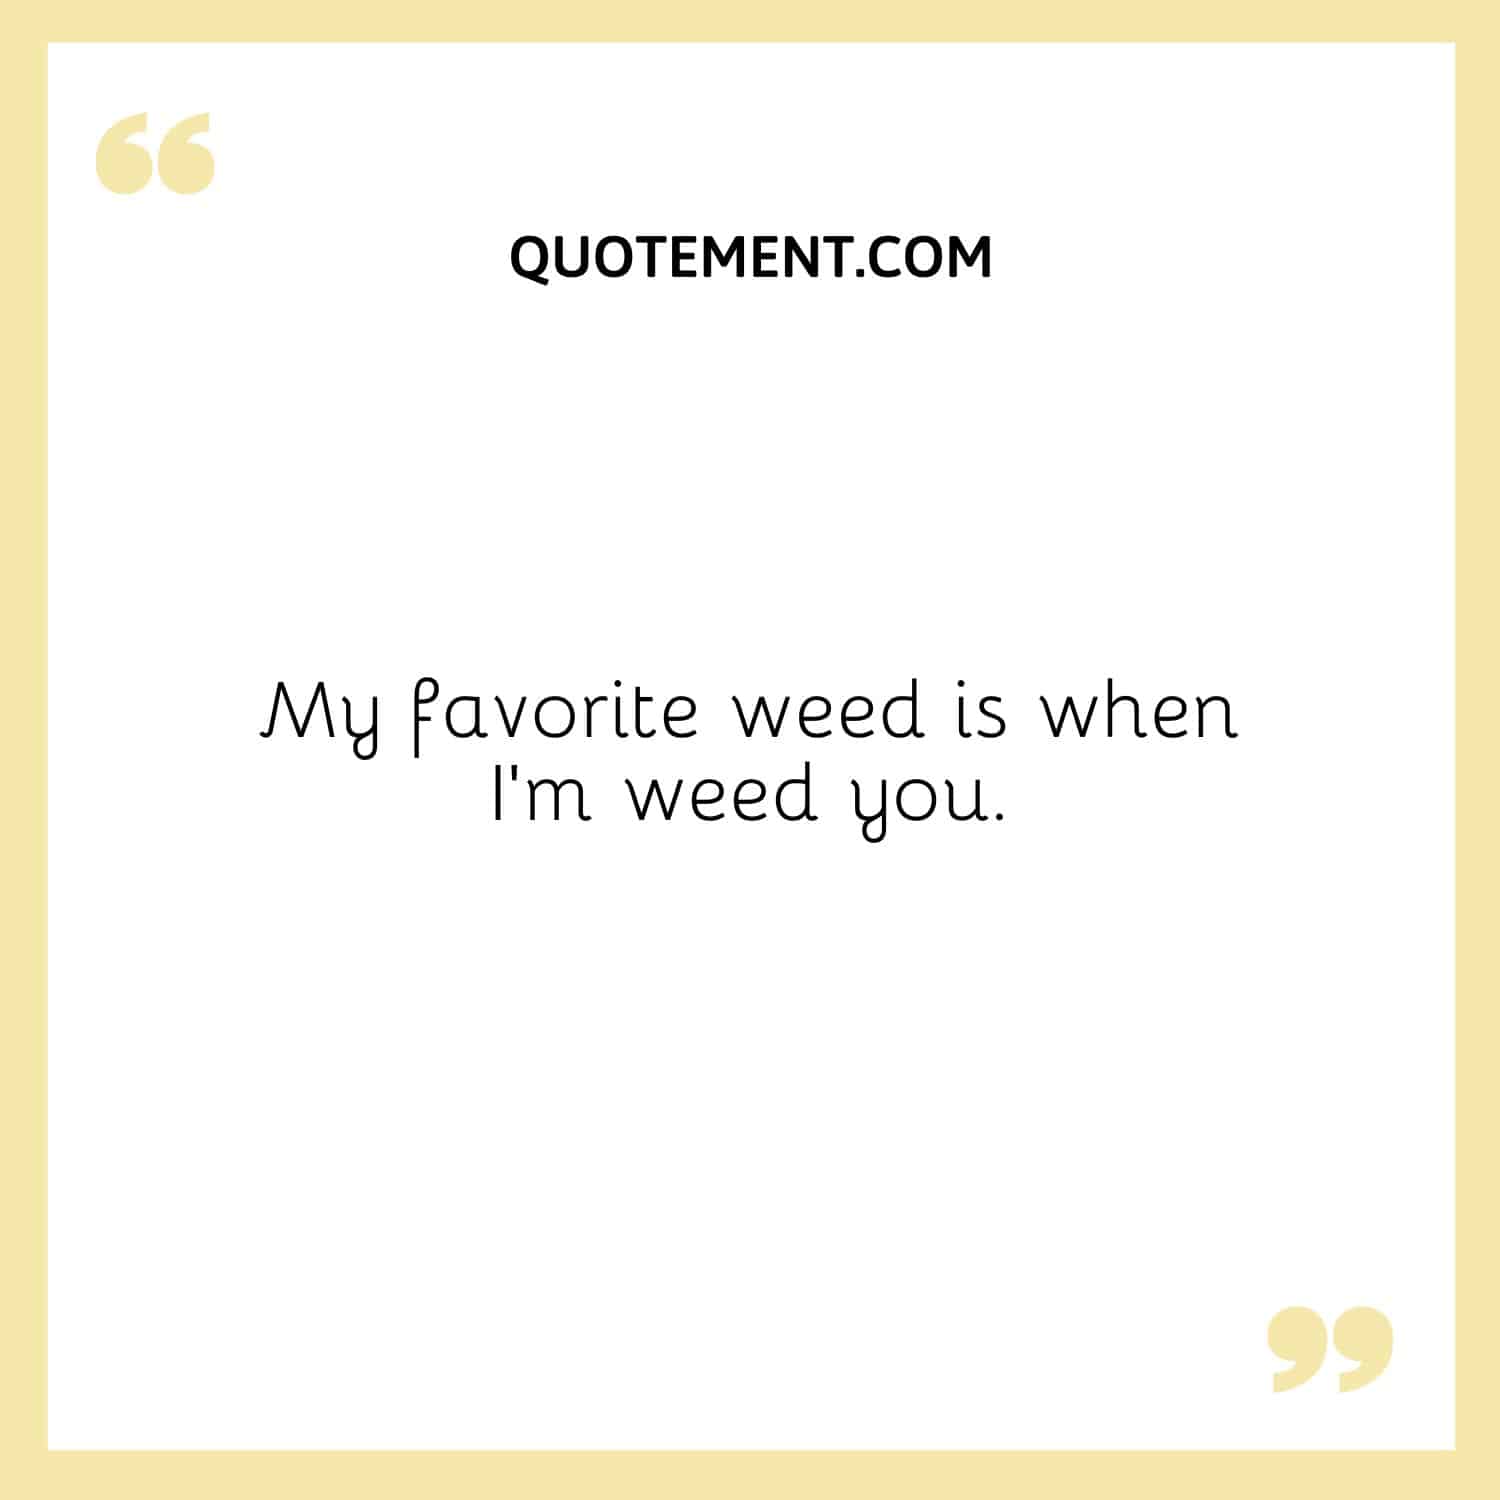 My favorite weed is when I’m weed you